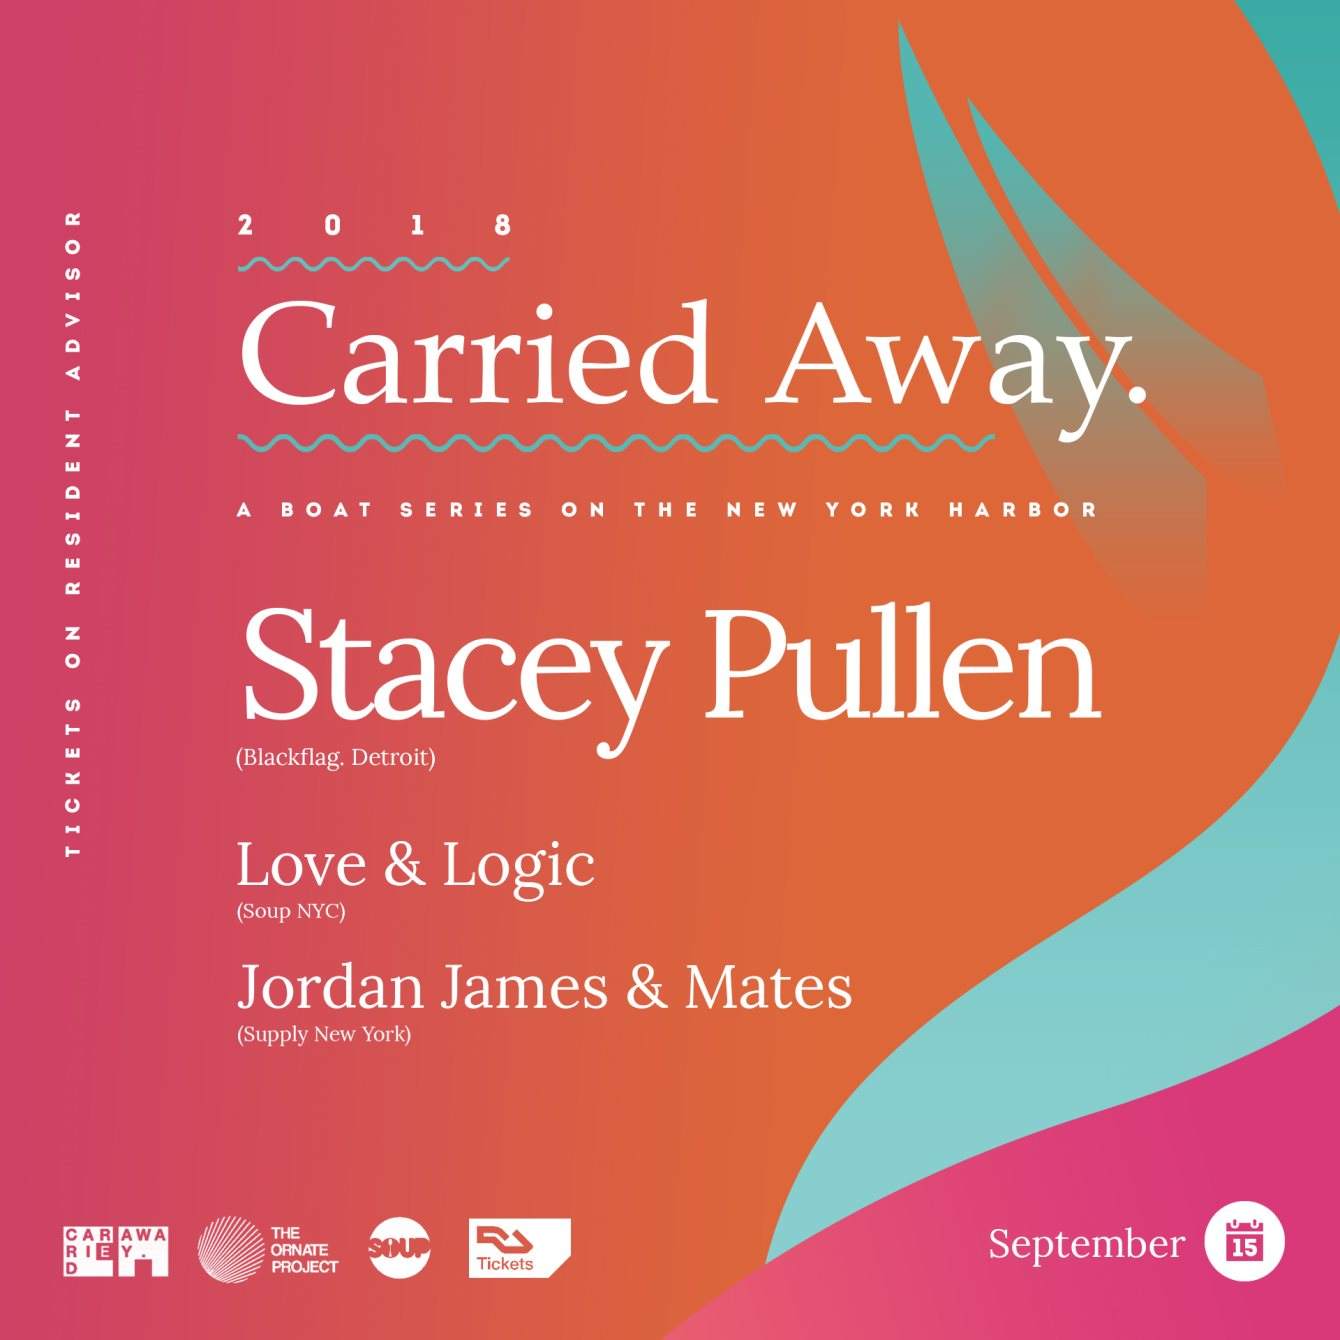 Carried Away with Stacey Pullen - Página frontal